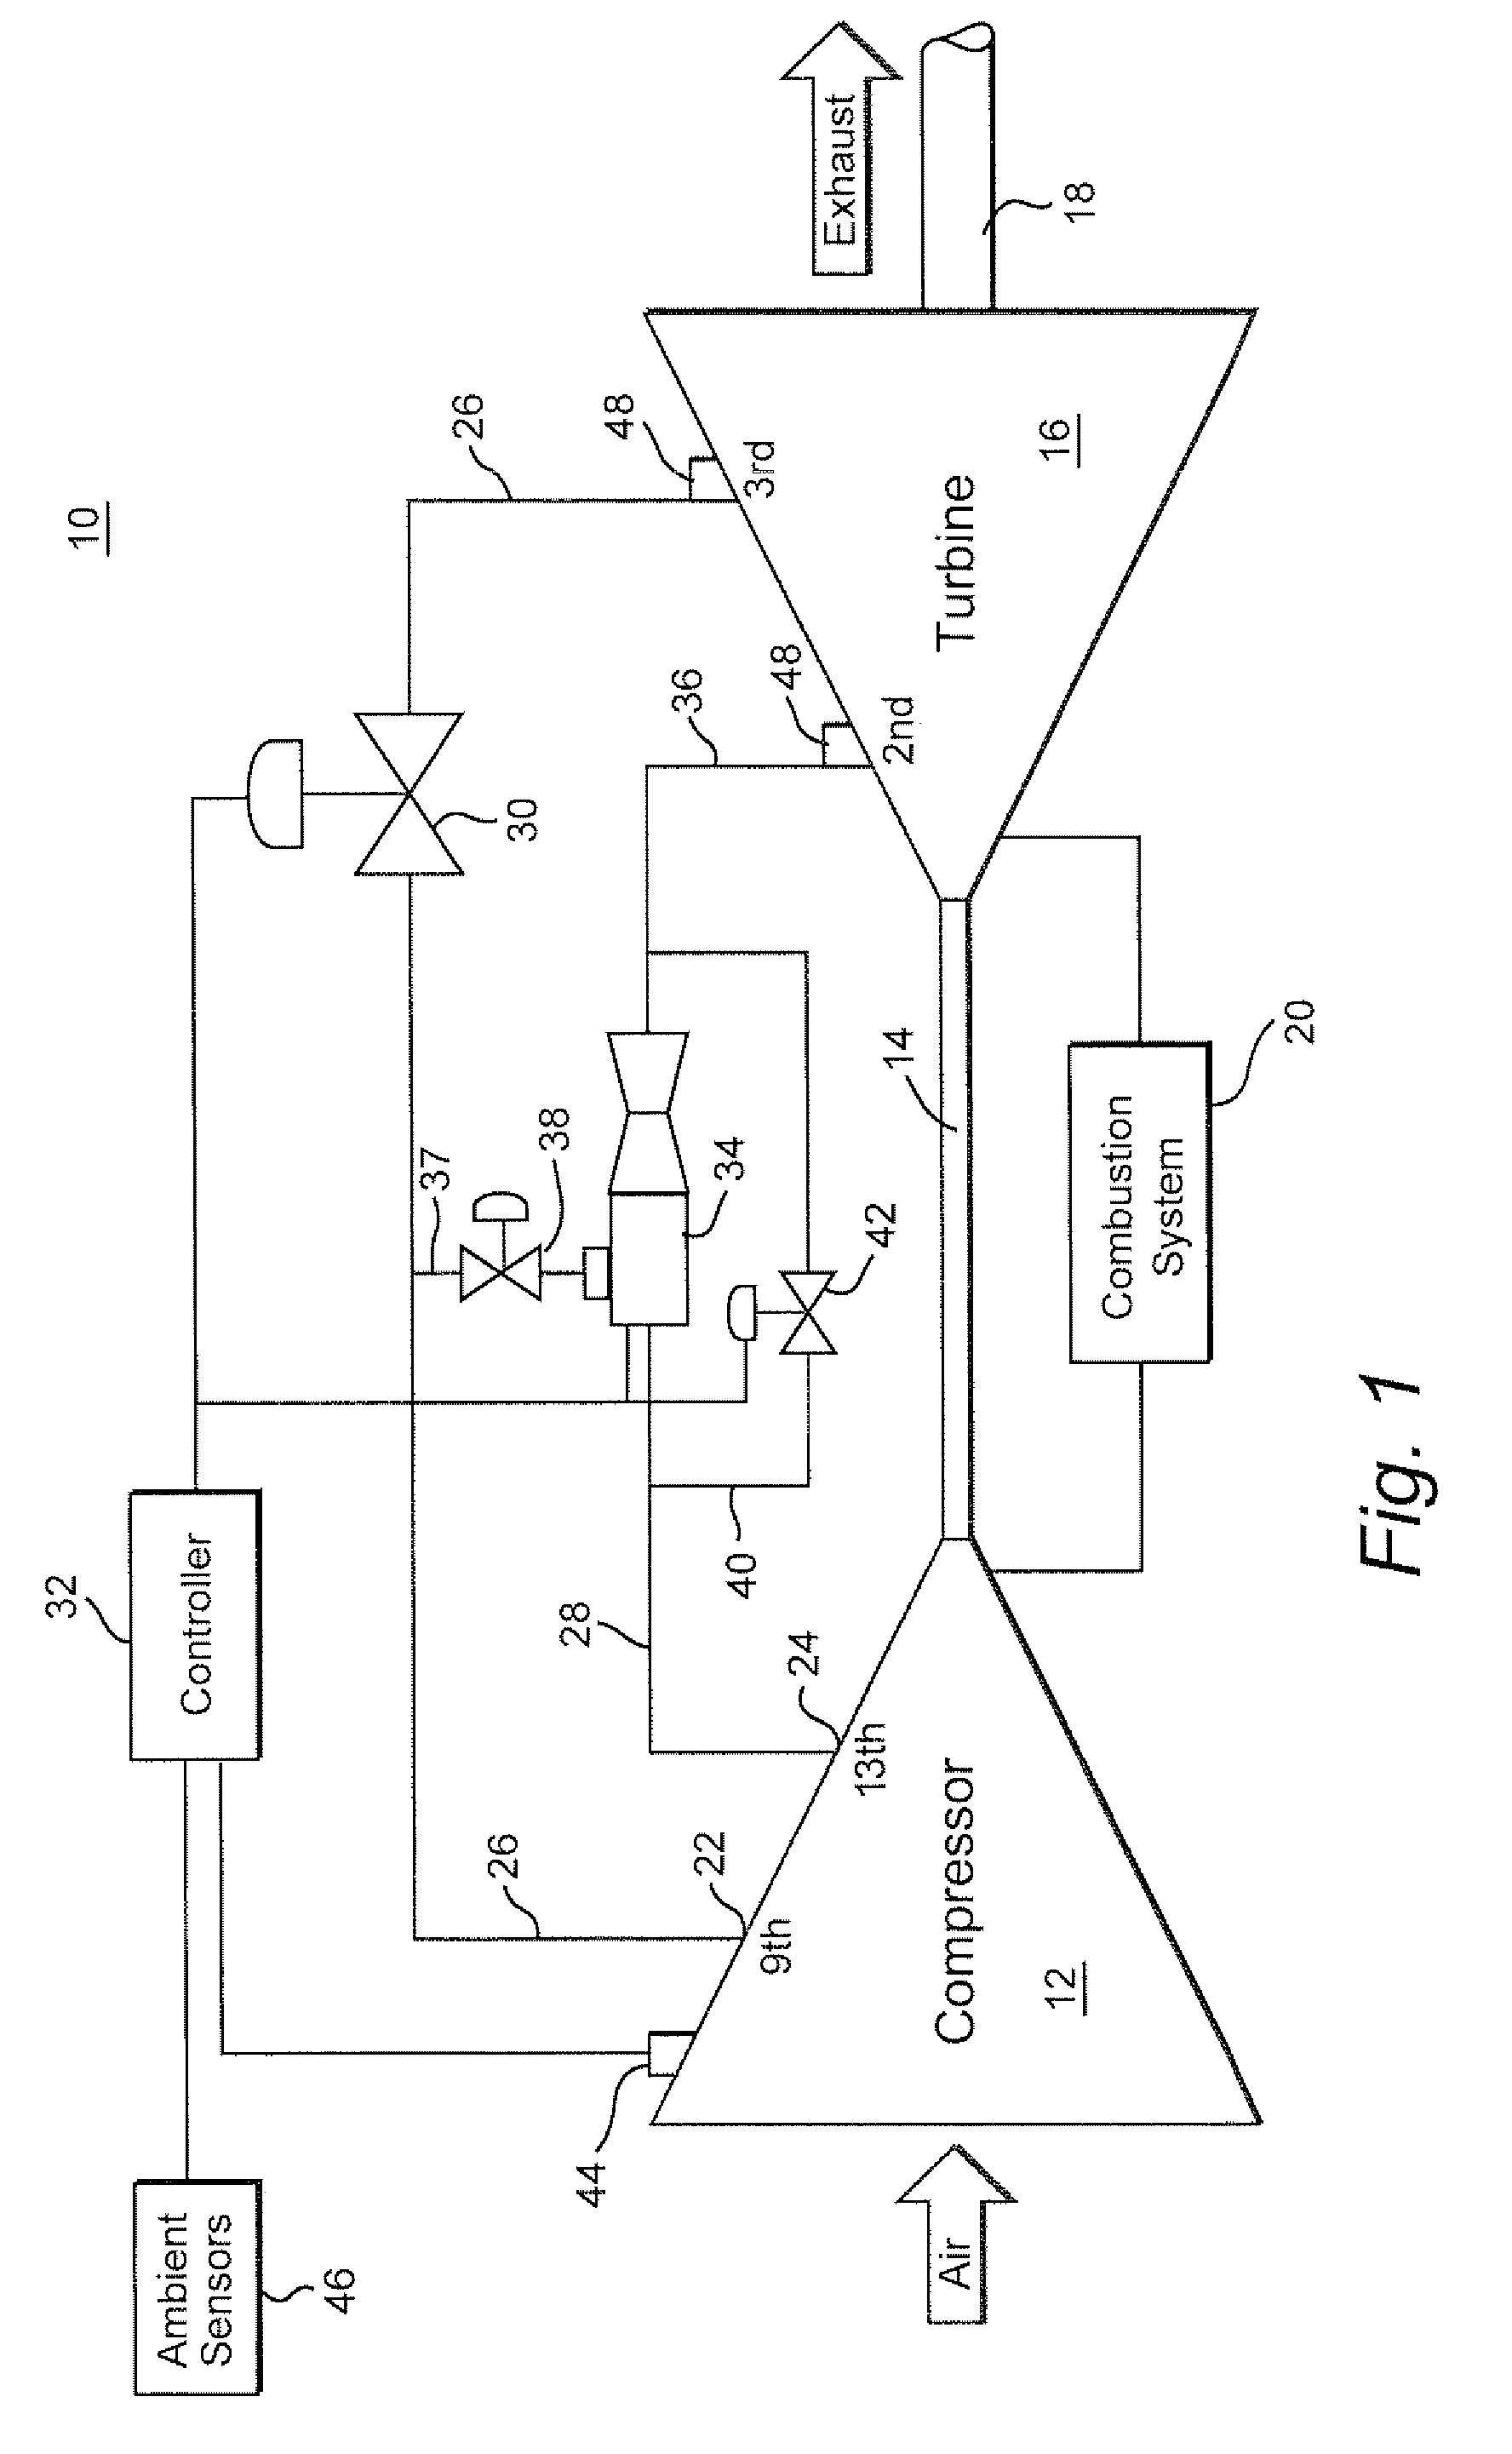 Method and system for controlling a set point for extracting air from a compressor to provide turbine cooling air in a gas turbine